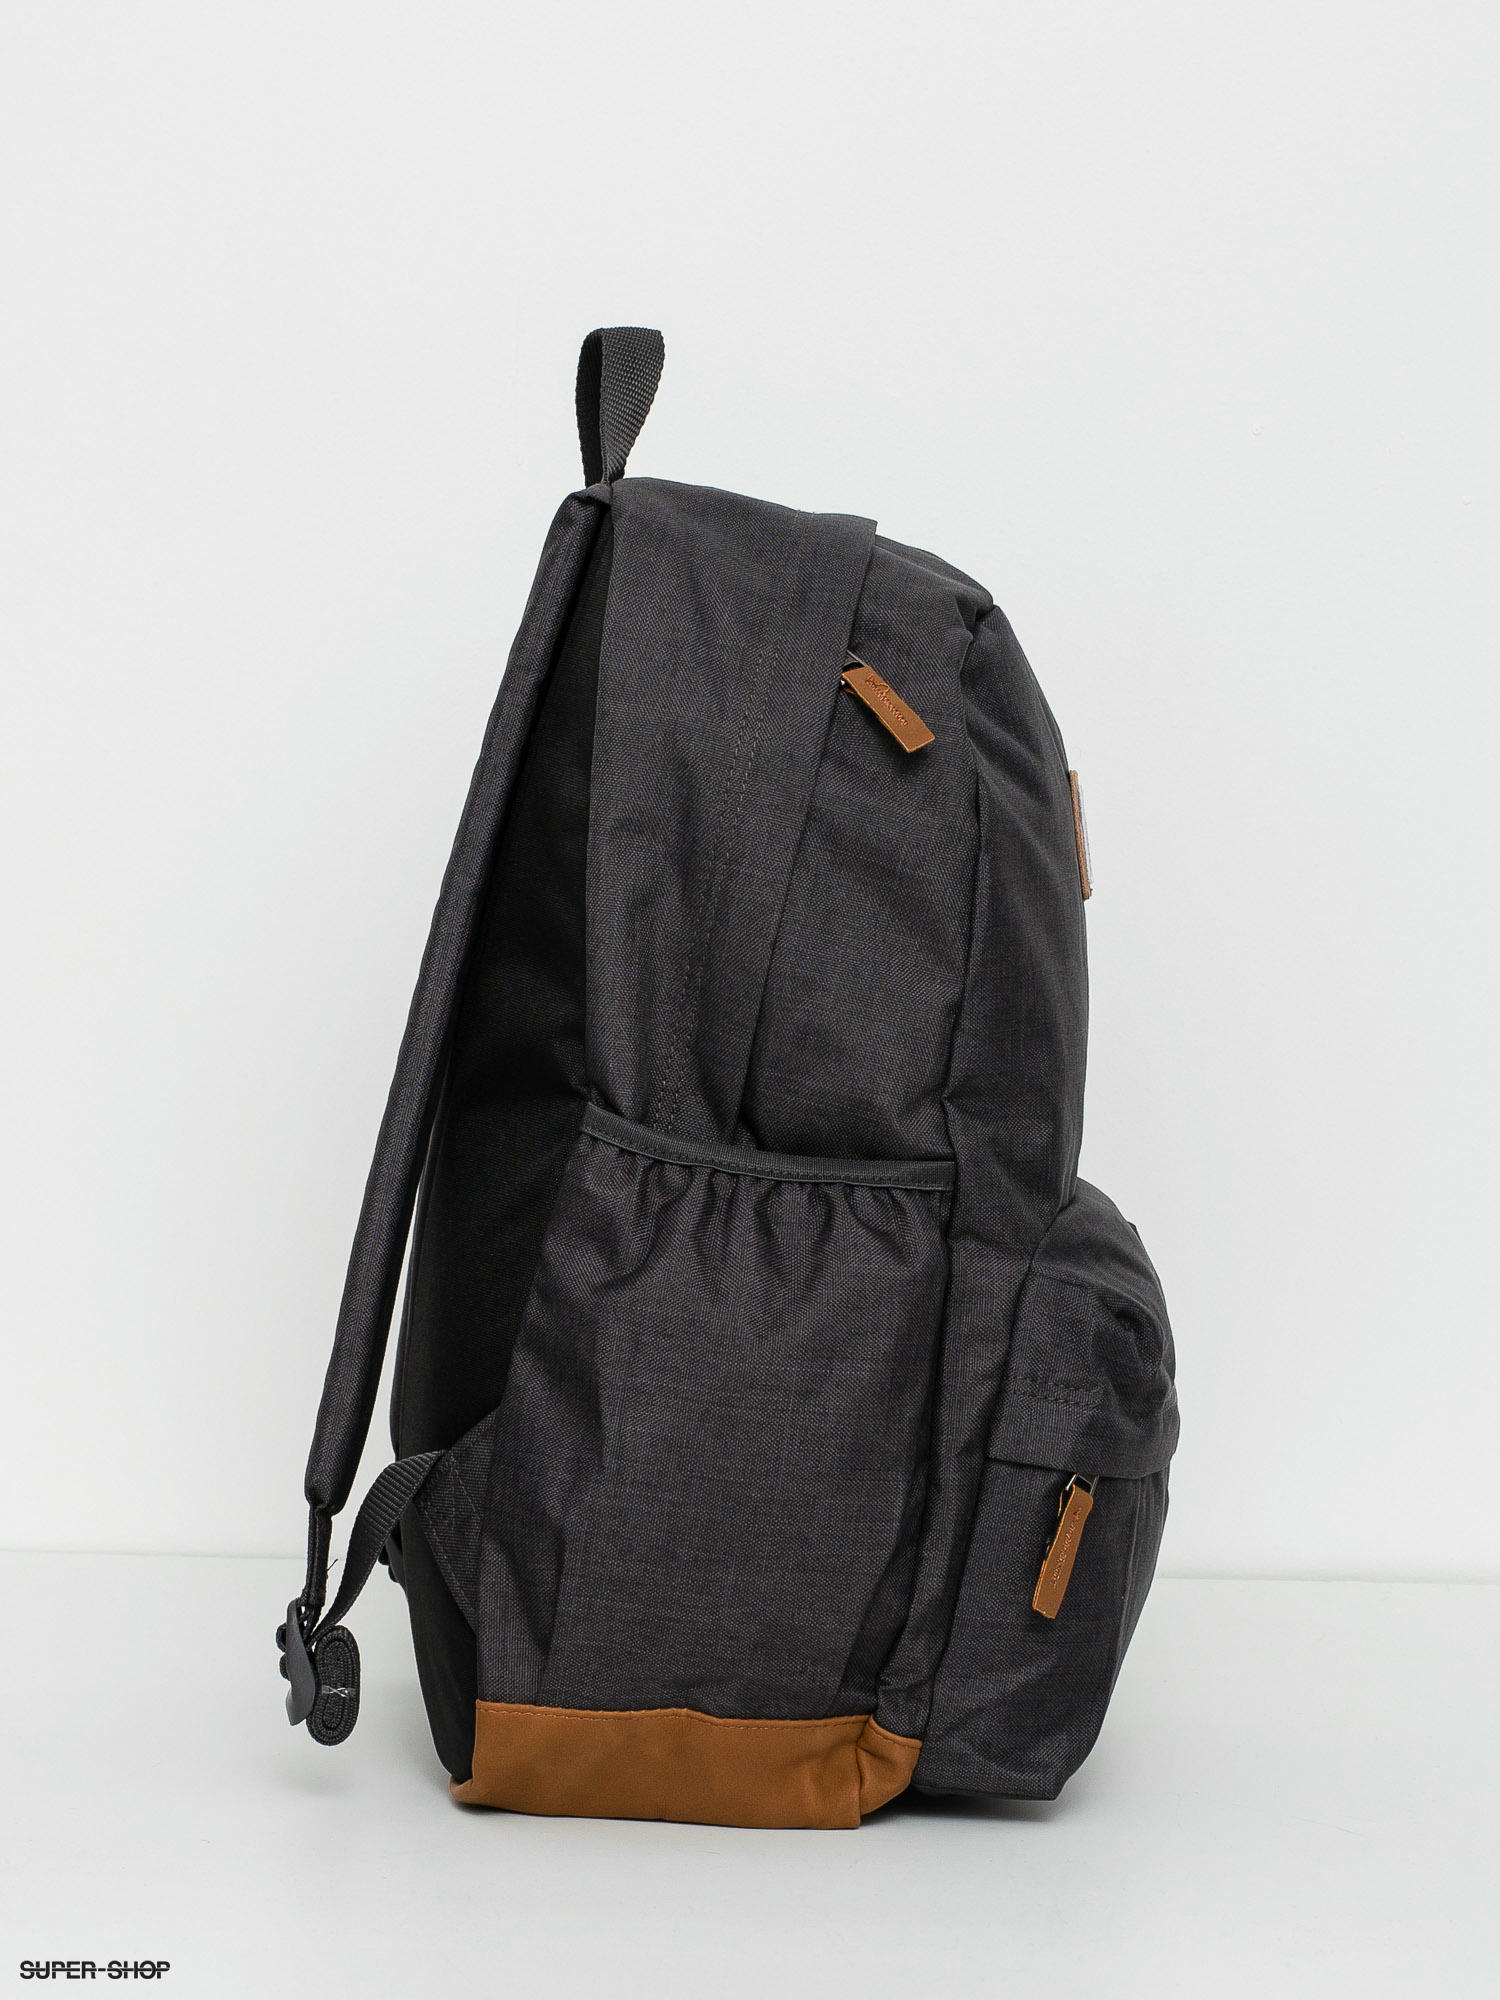 realm plus backpack